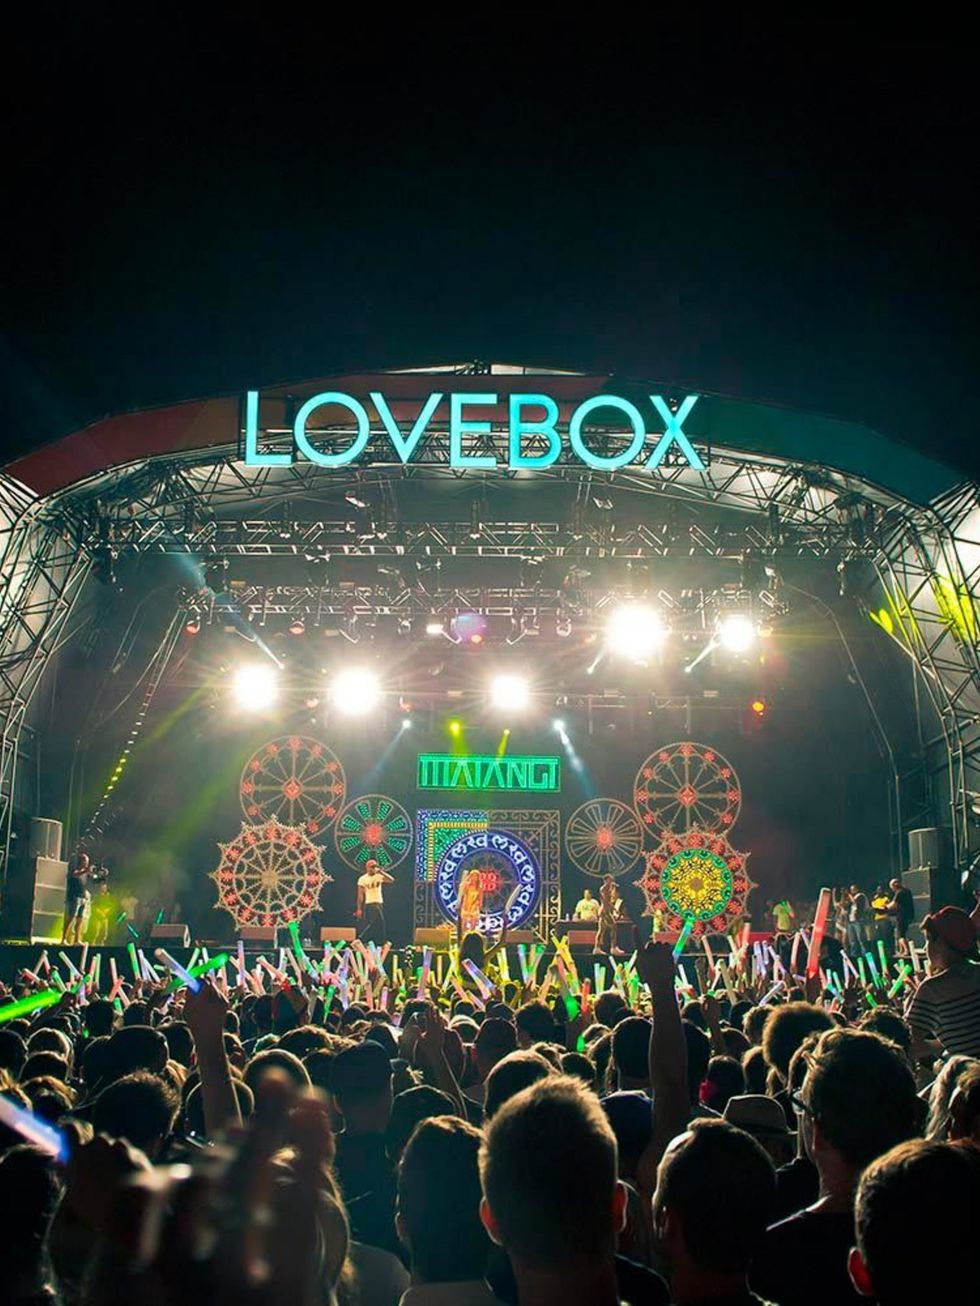 <p>Festival: Lovebox</p>

<p>It's back: Victoria Park's annual two-day trip into beats-fuelled, hard-partying festival fun. And with Rudimental, Hot Chip, Cypress Hill, Little Dragon and Snoop Dogg all on the bill, not to mention DJ sets by Mark Ronson, A